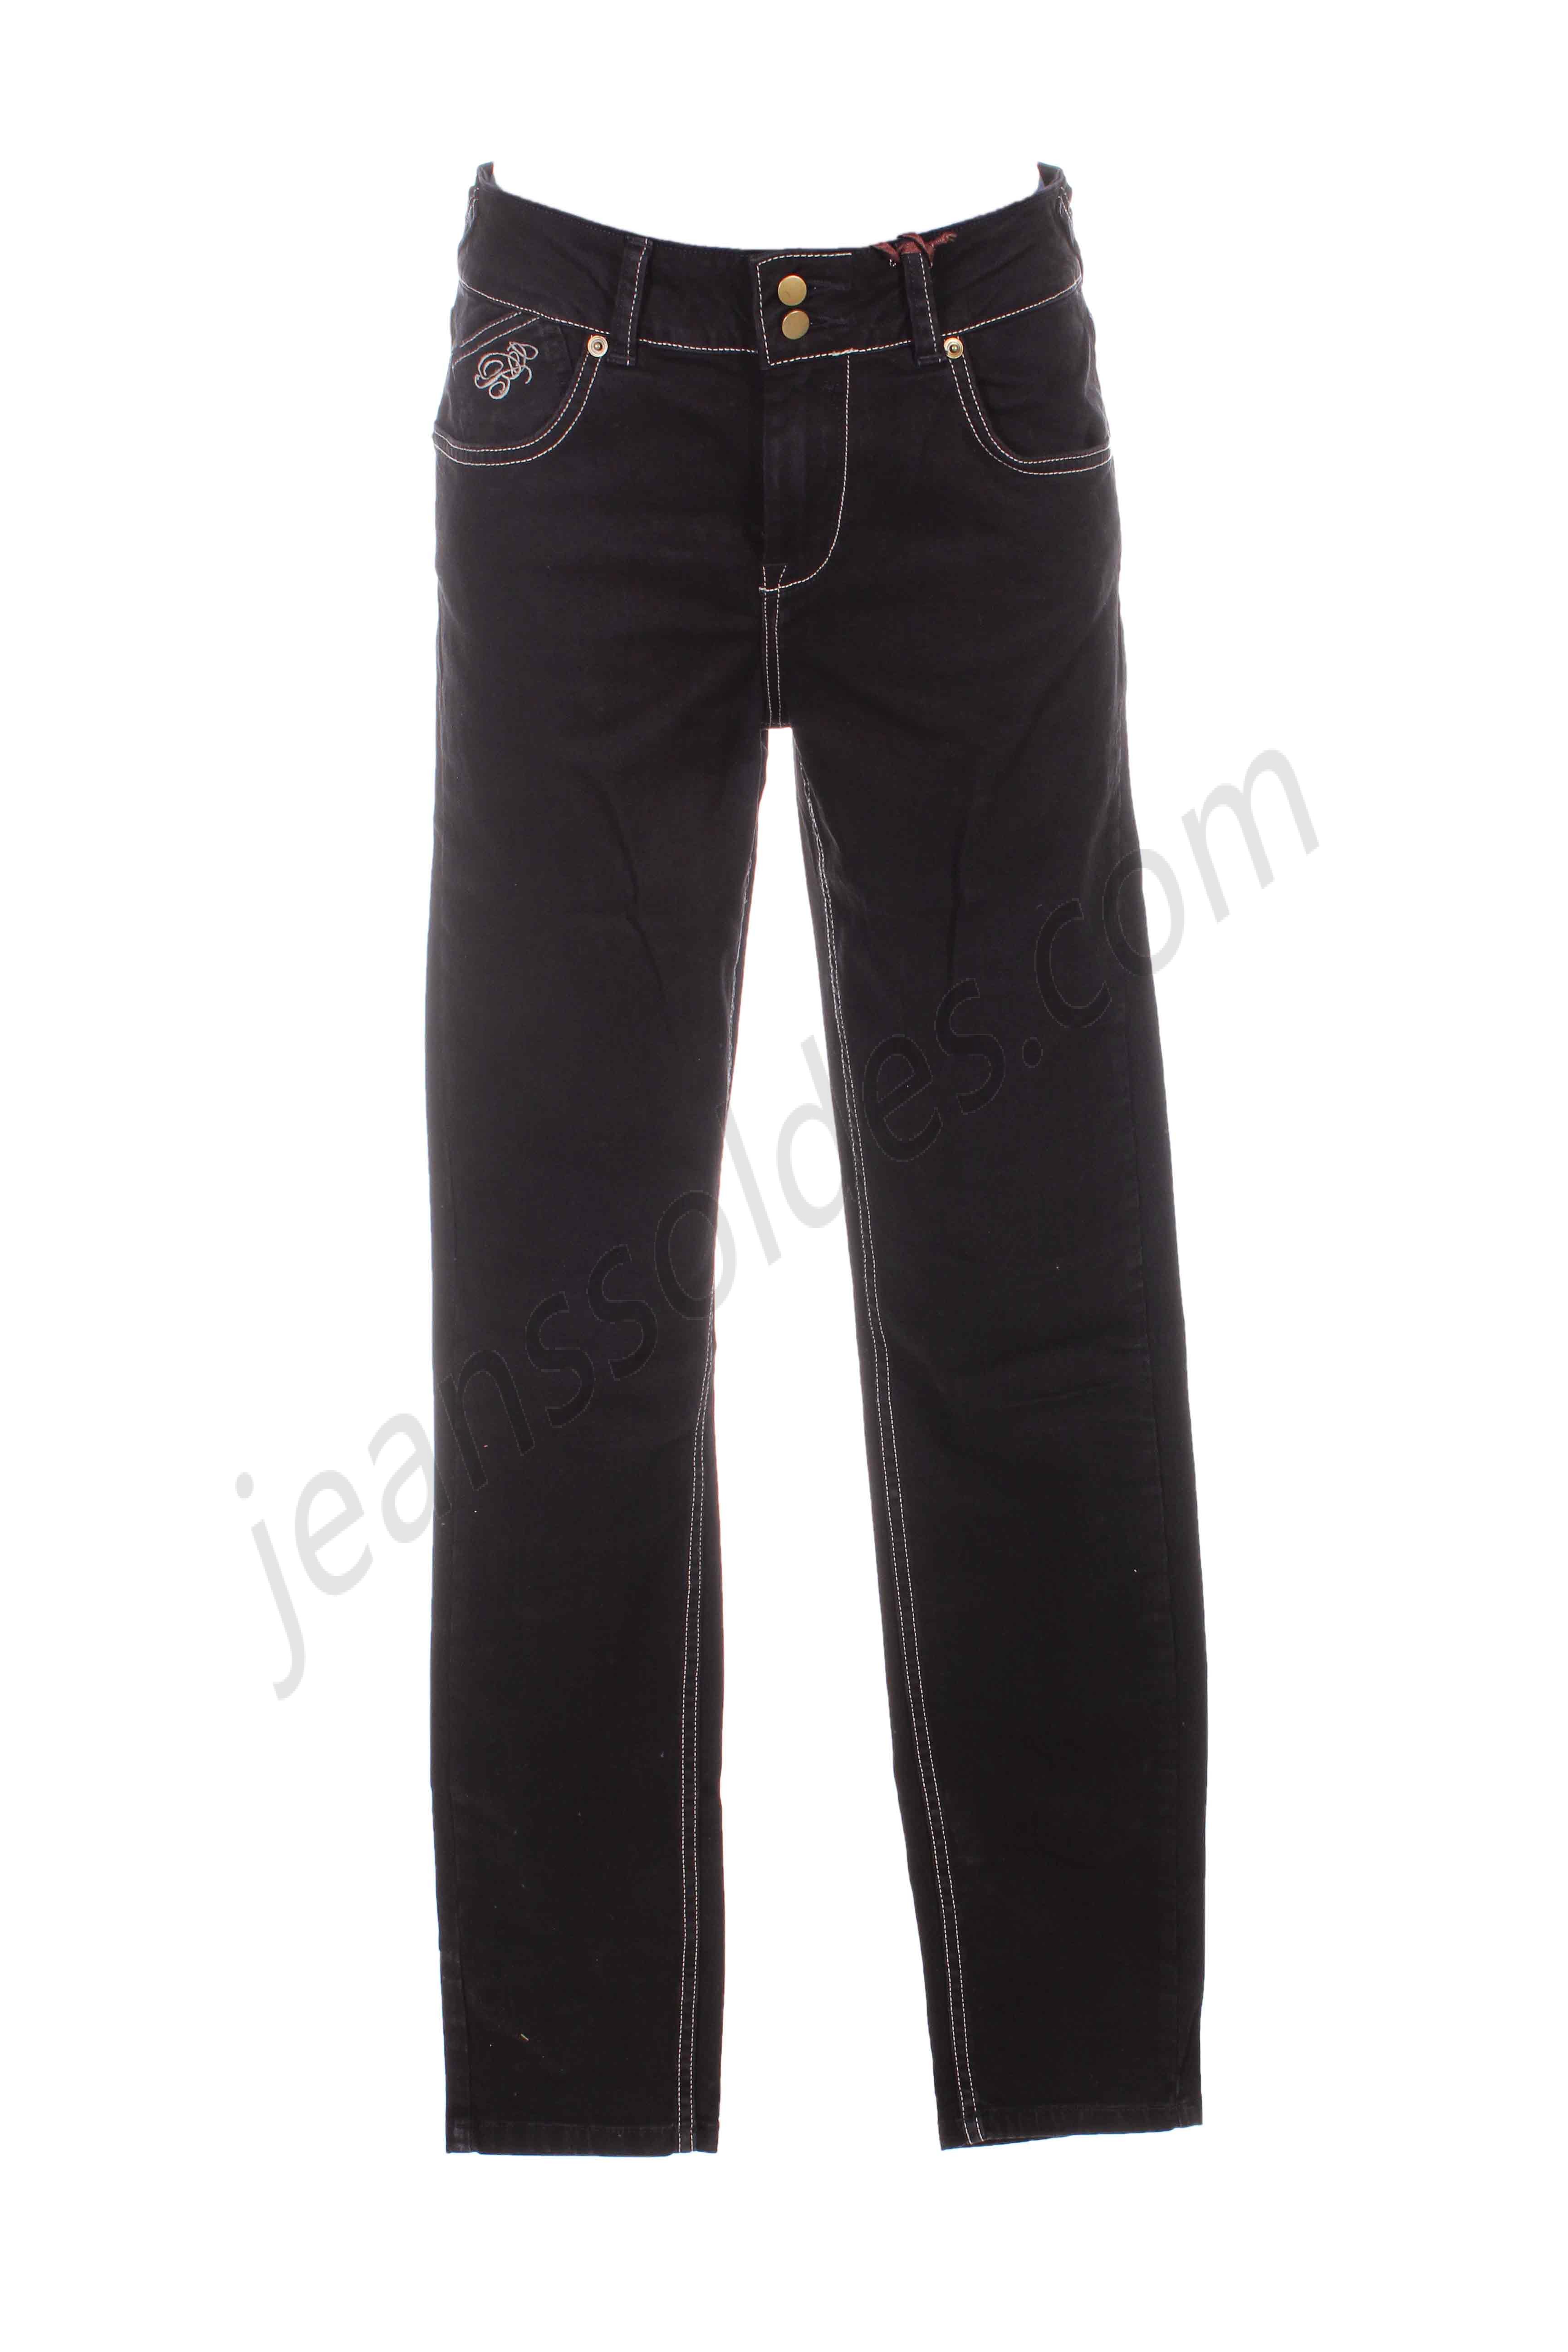 coleen bow-Jeans coupe slim prix d’amis - coleen bow-Jeans coupe slim prix d’amis